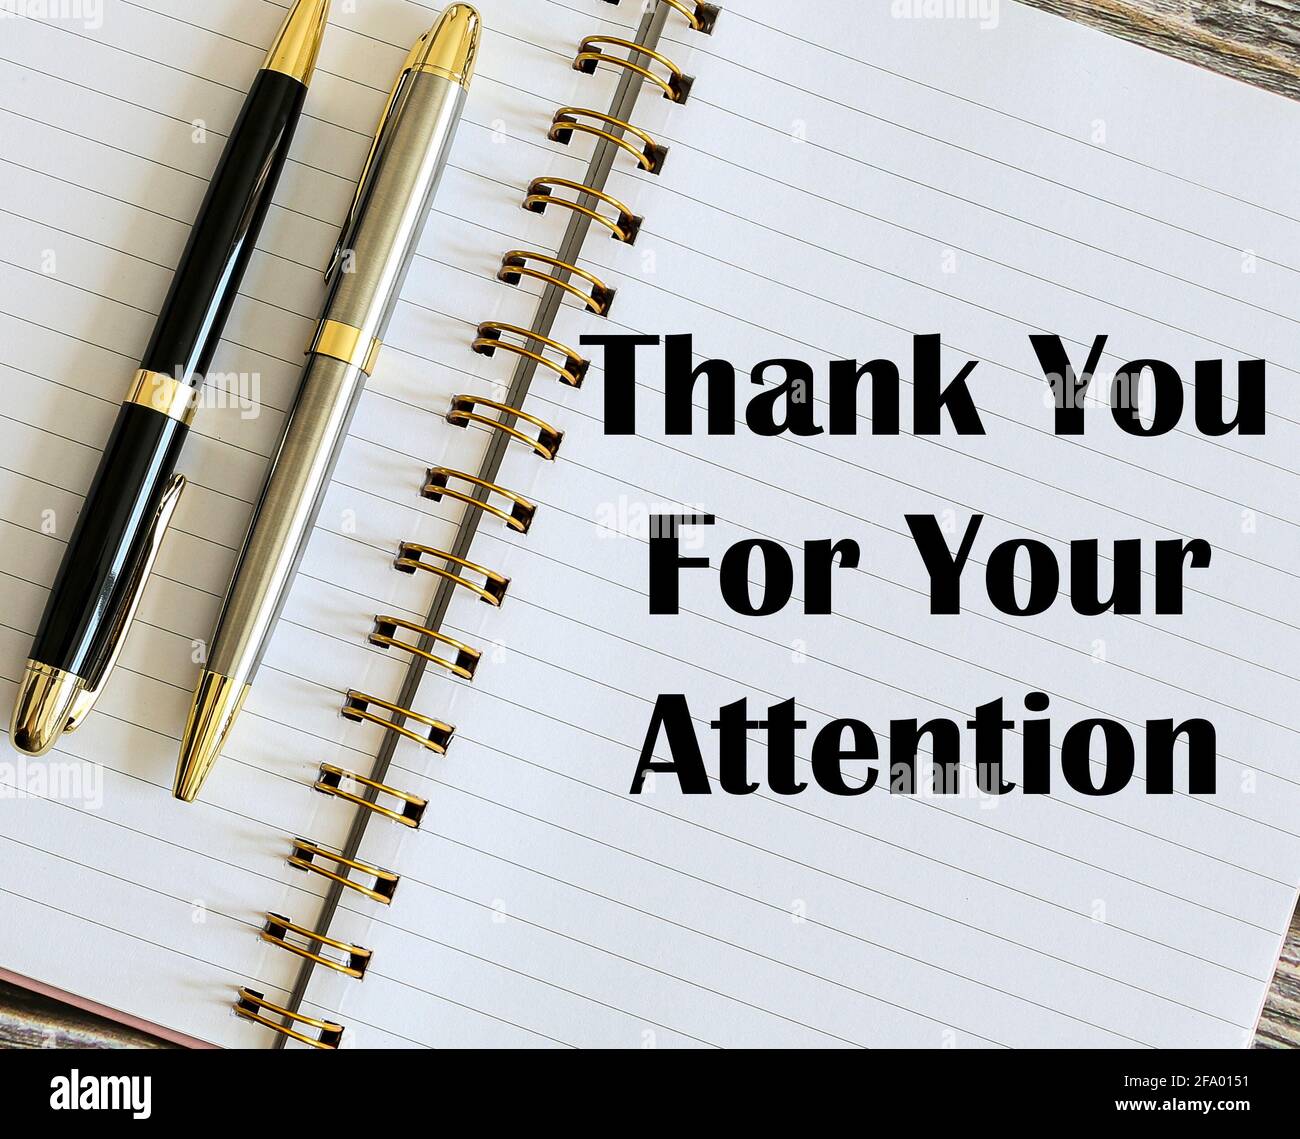 thank you for your attention